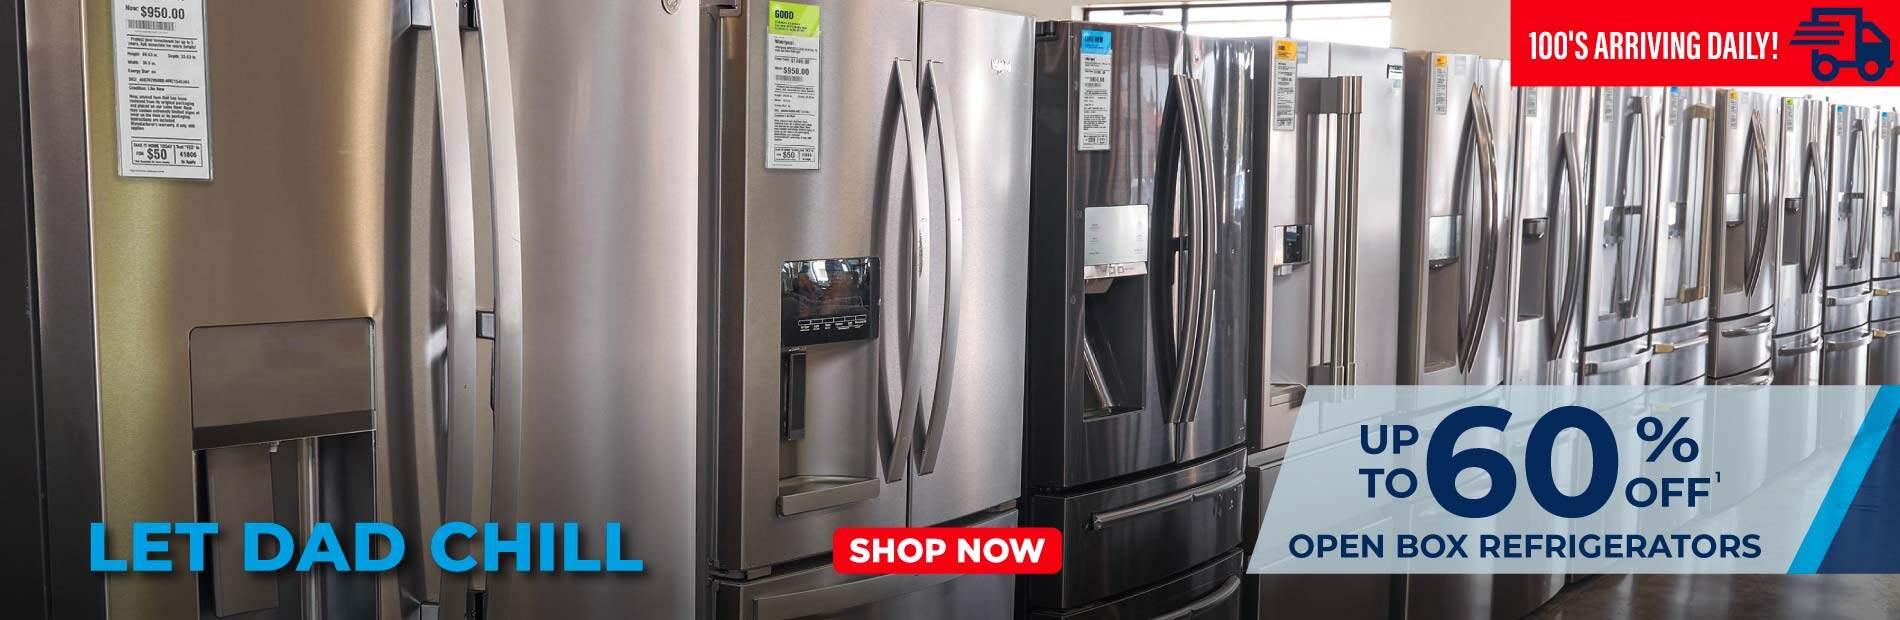 Let Dad Chill up to 60% off open box refrigerators. 100's arriving daily. Shop Now.